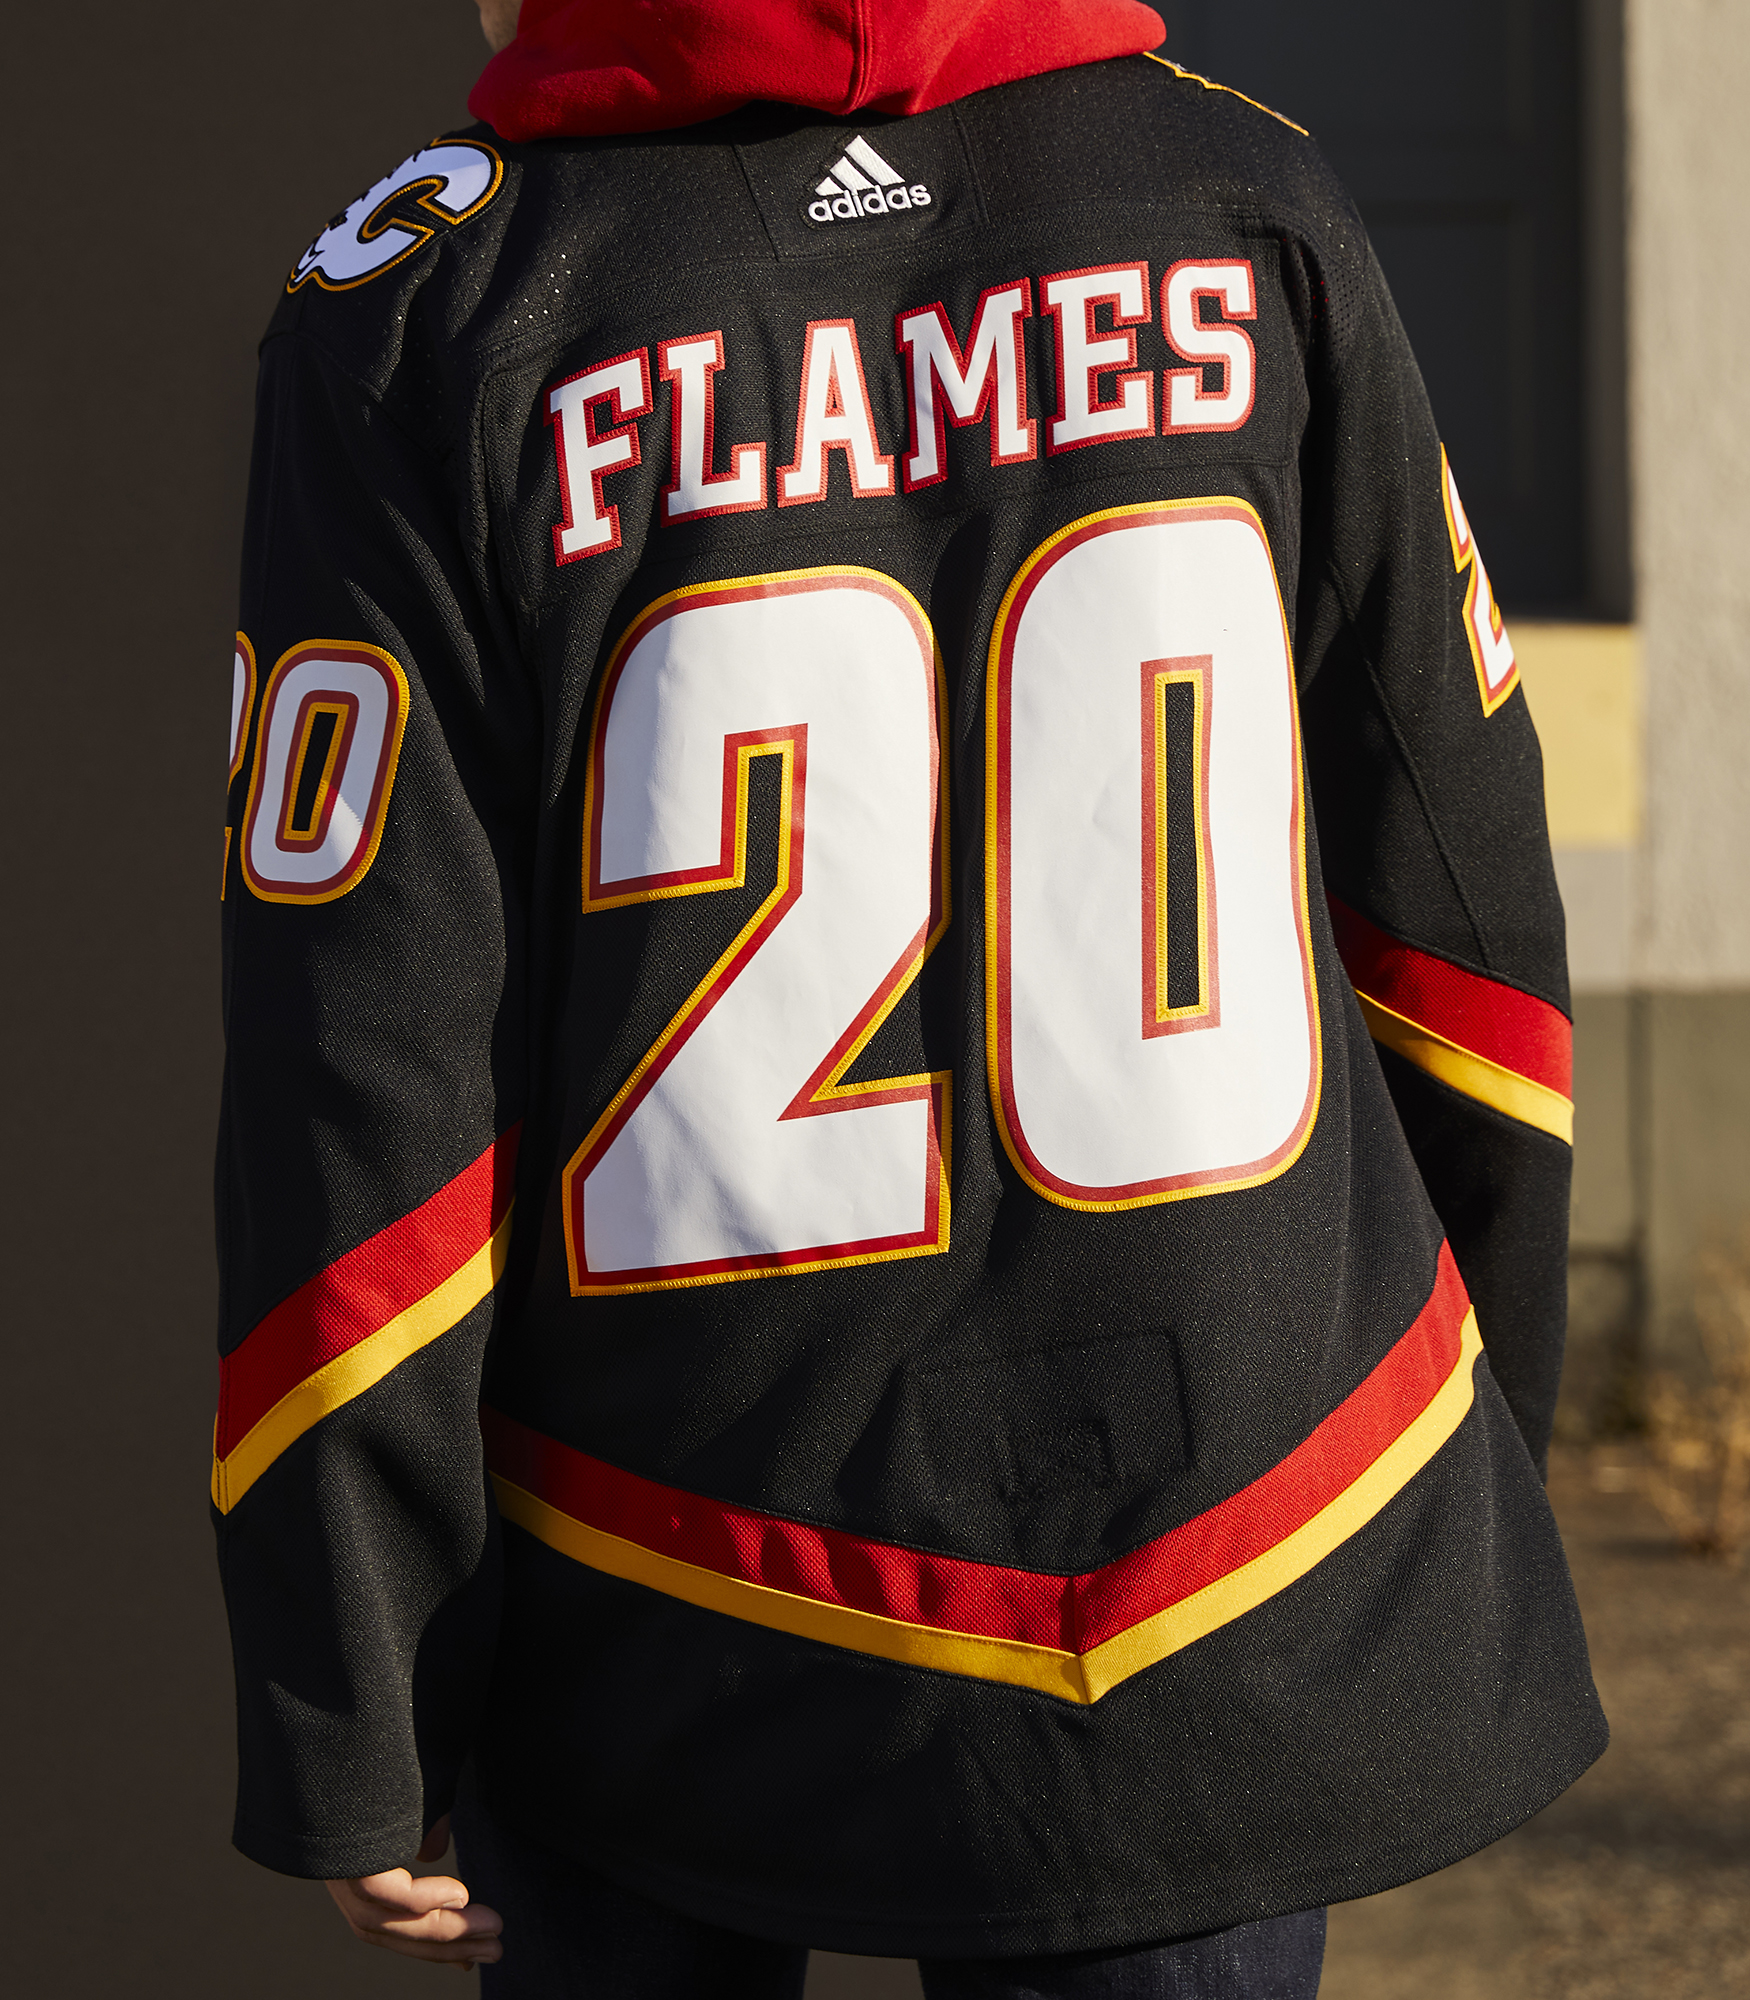 Calgary Flames: The return of Blasty is worth being thankful for